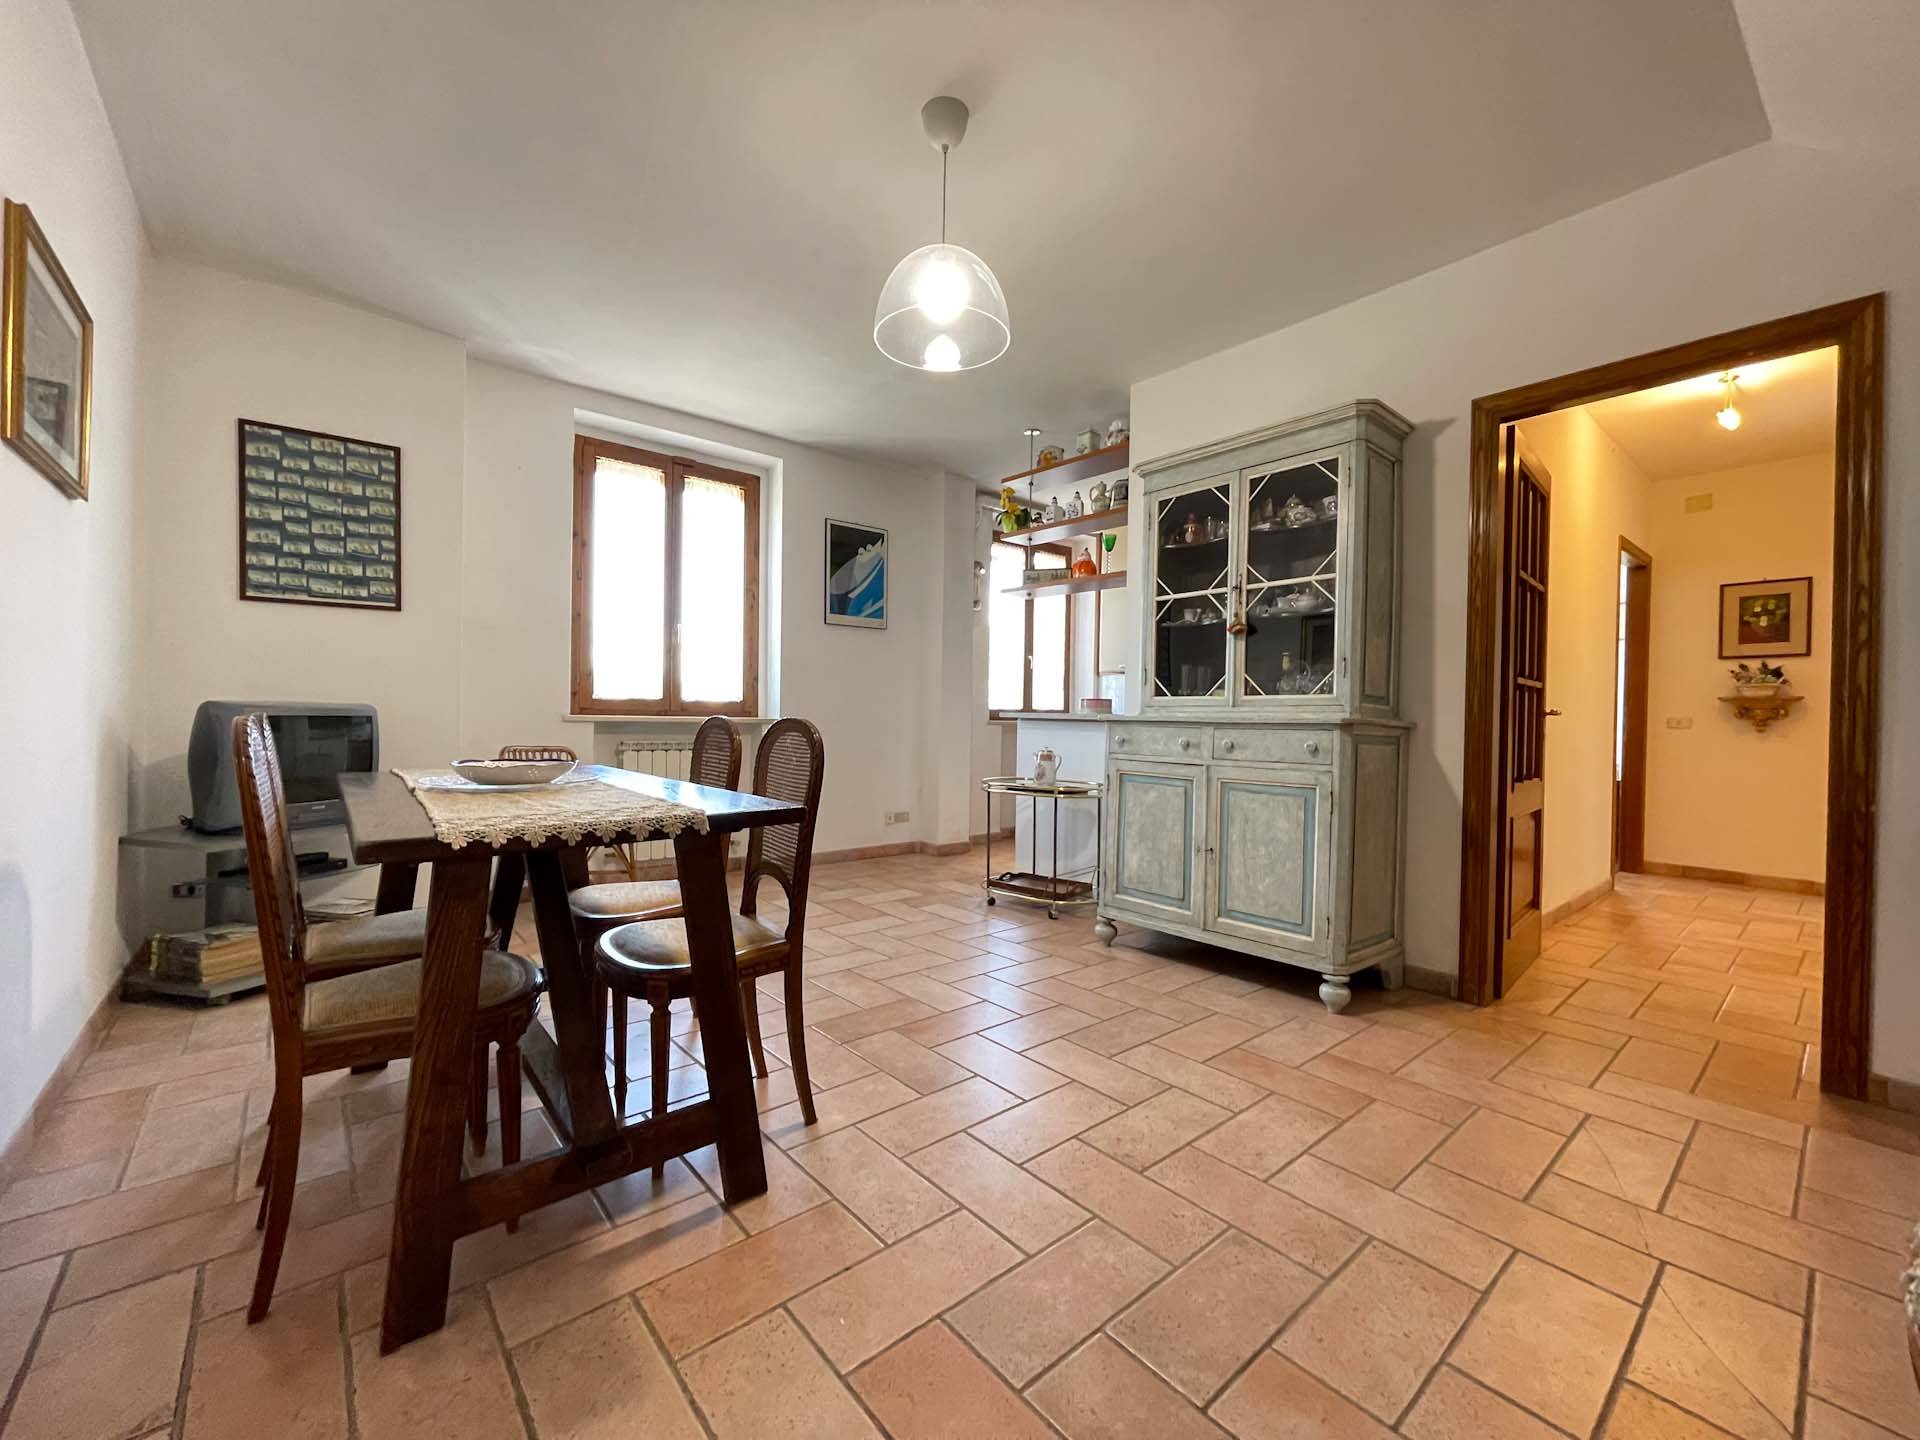 Inside the farmhouse called Ex Tabaccaia, at the entrance of San Rocco a Pilli, apartment on the first floor and arranged on two levels. It consists of a living-dining room with a kitchenette and two 